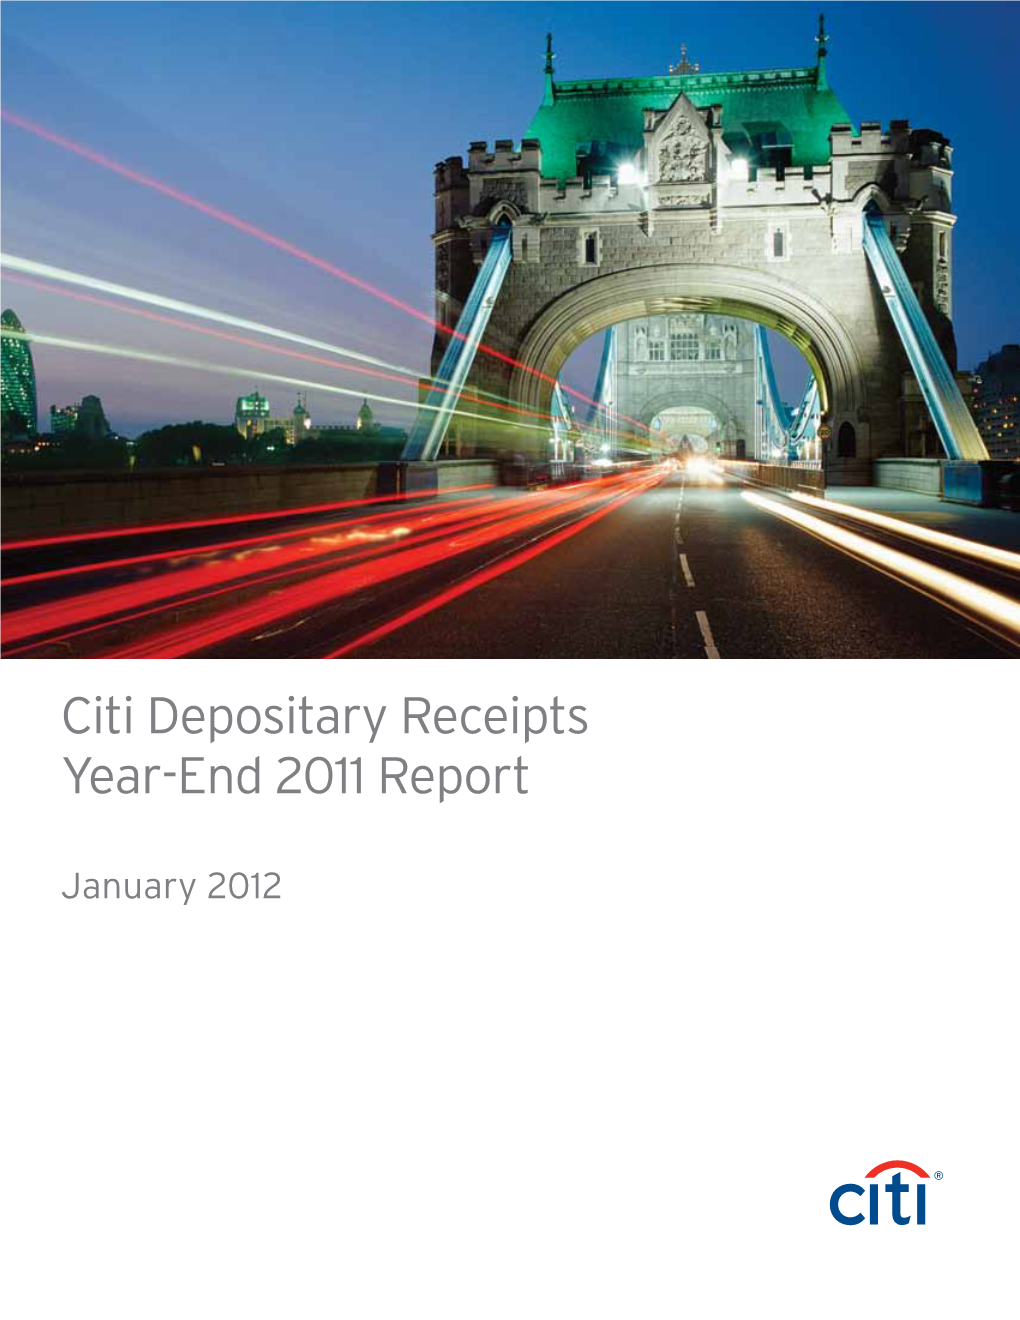 Citi Depositary Receipts Year-End 2011 Report